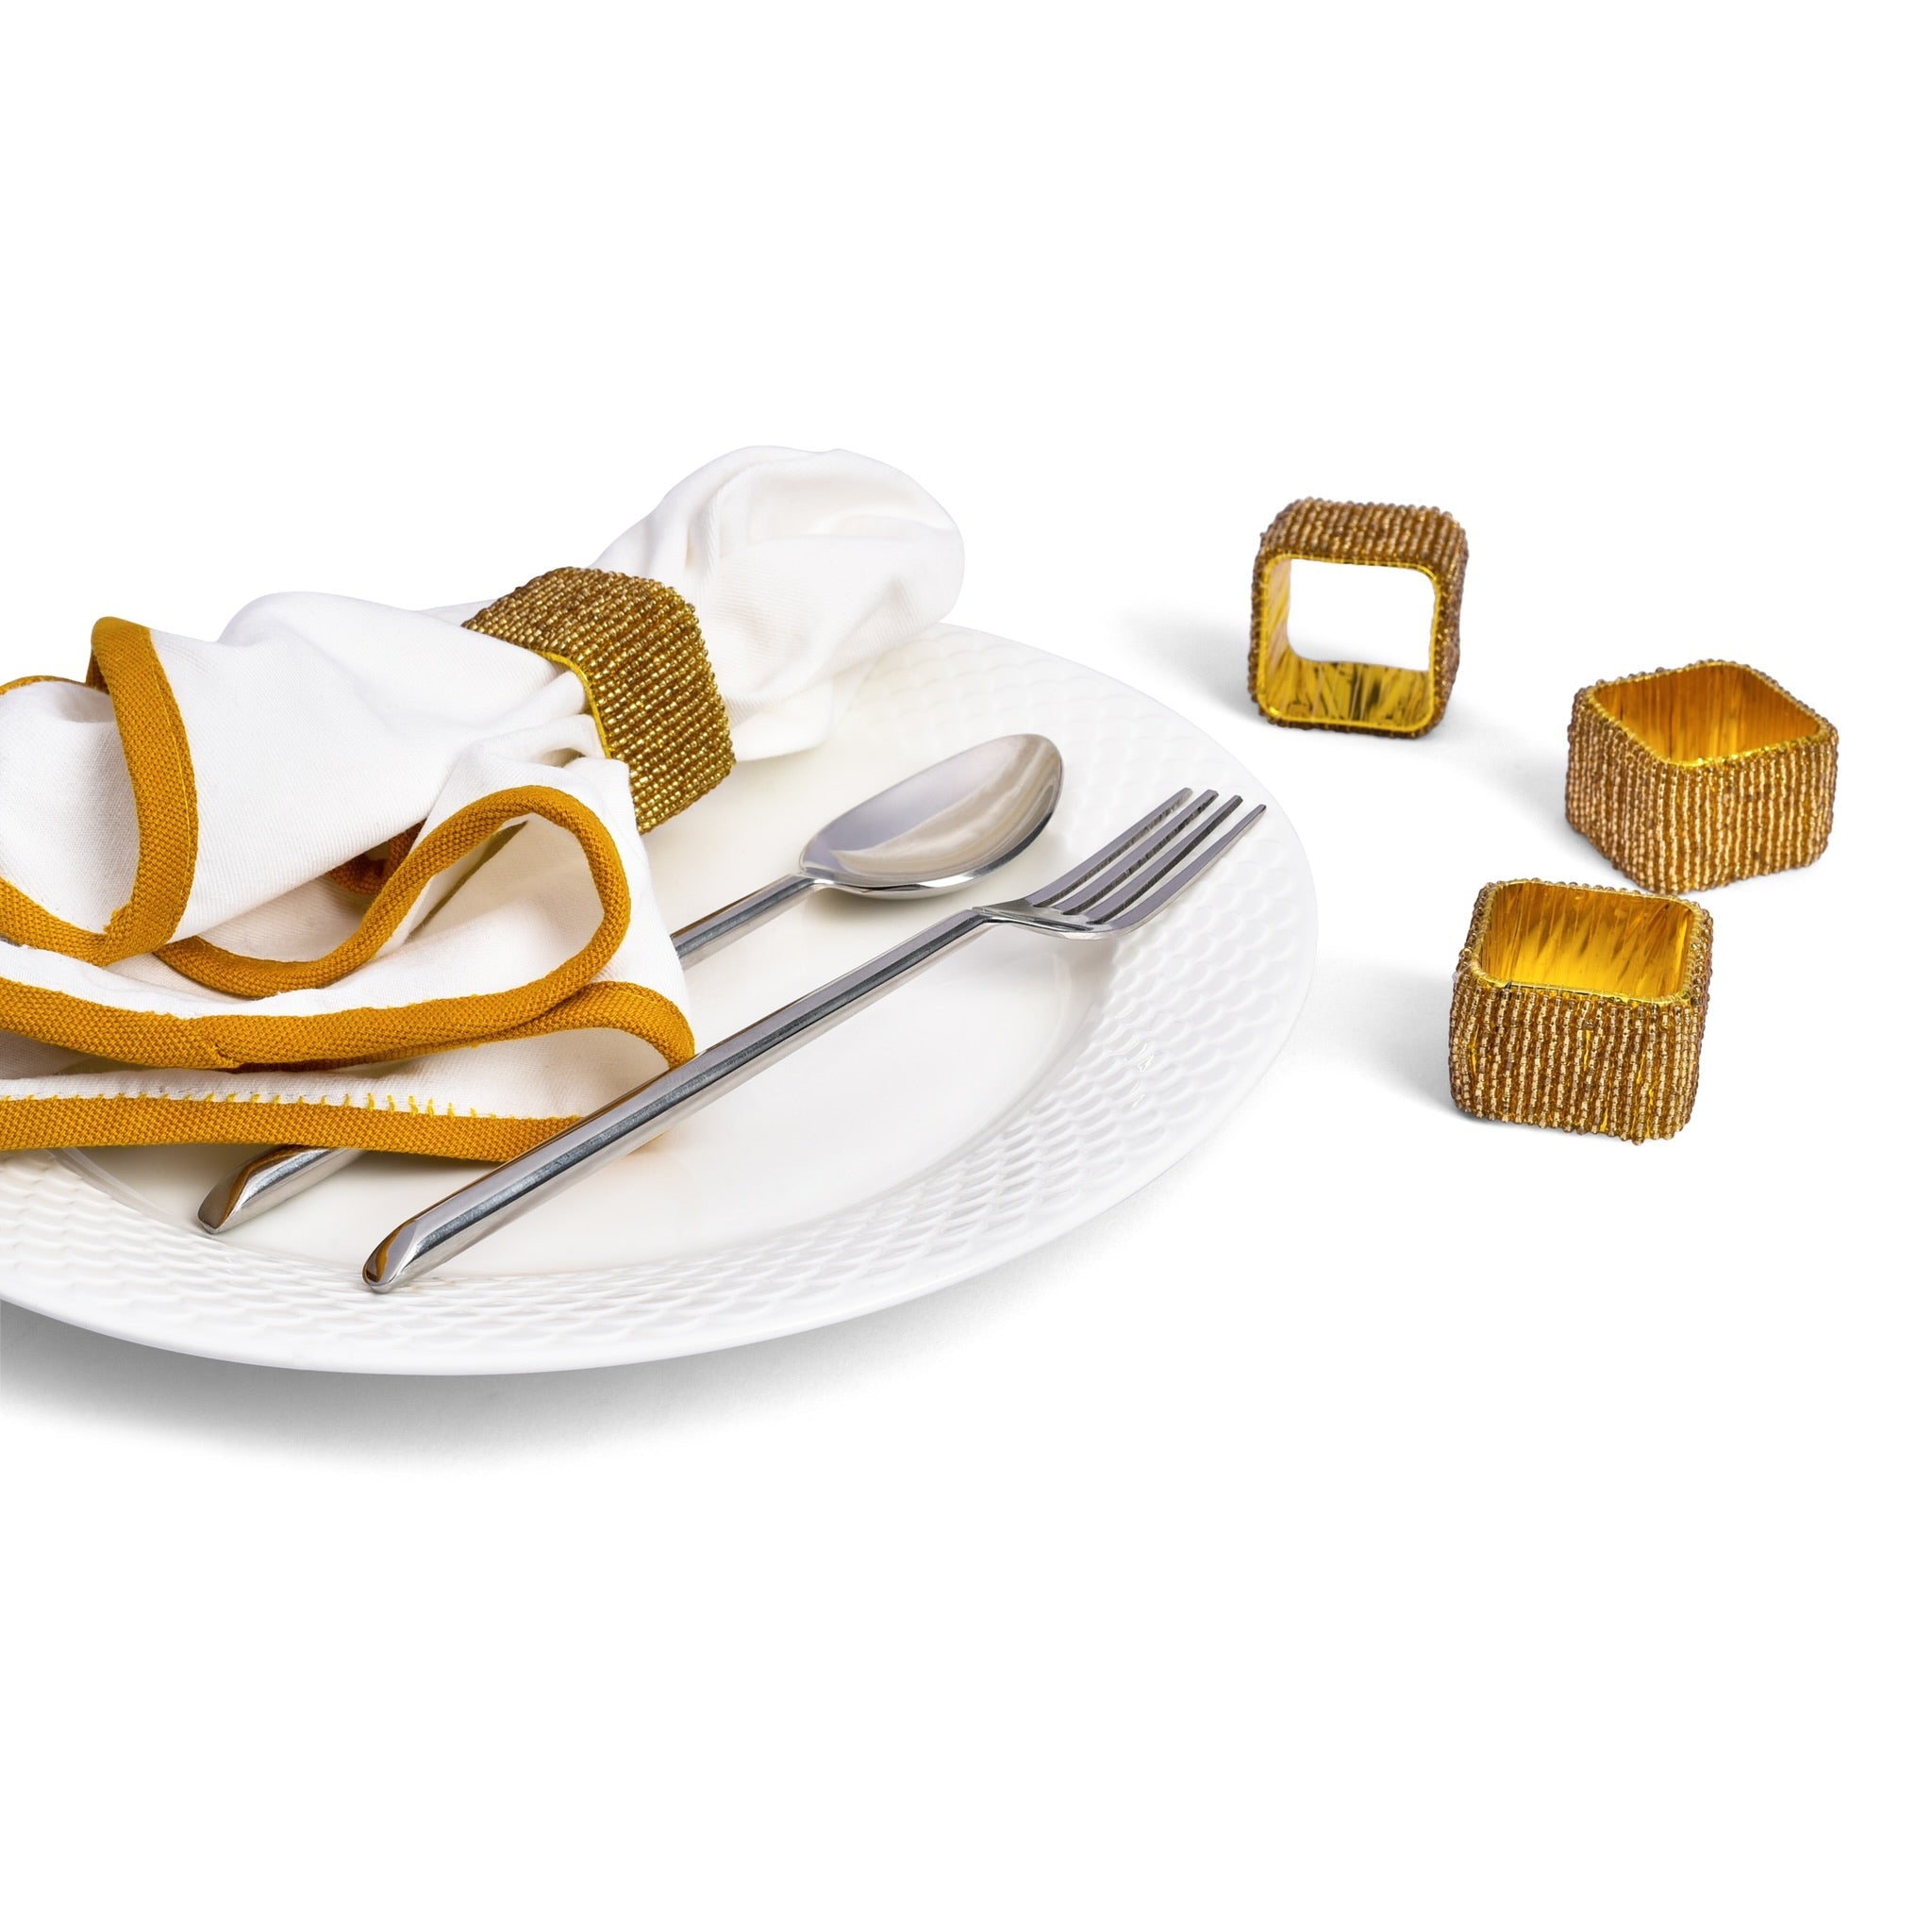 Glass Bead Table Setting for 4 - Placemats & Napkin Rings in Gold Two Tone